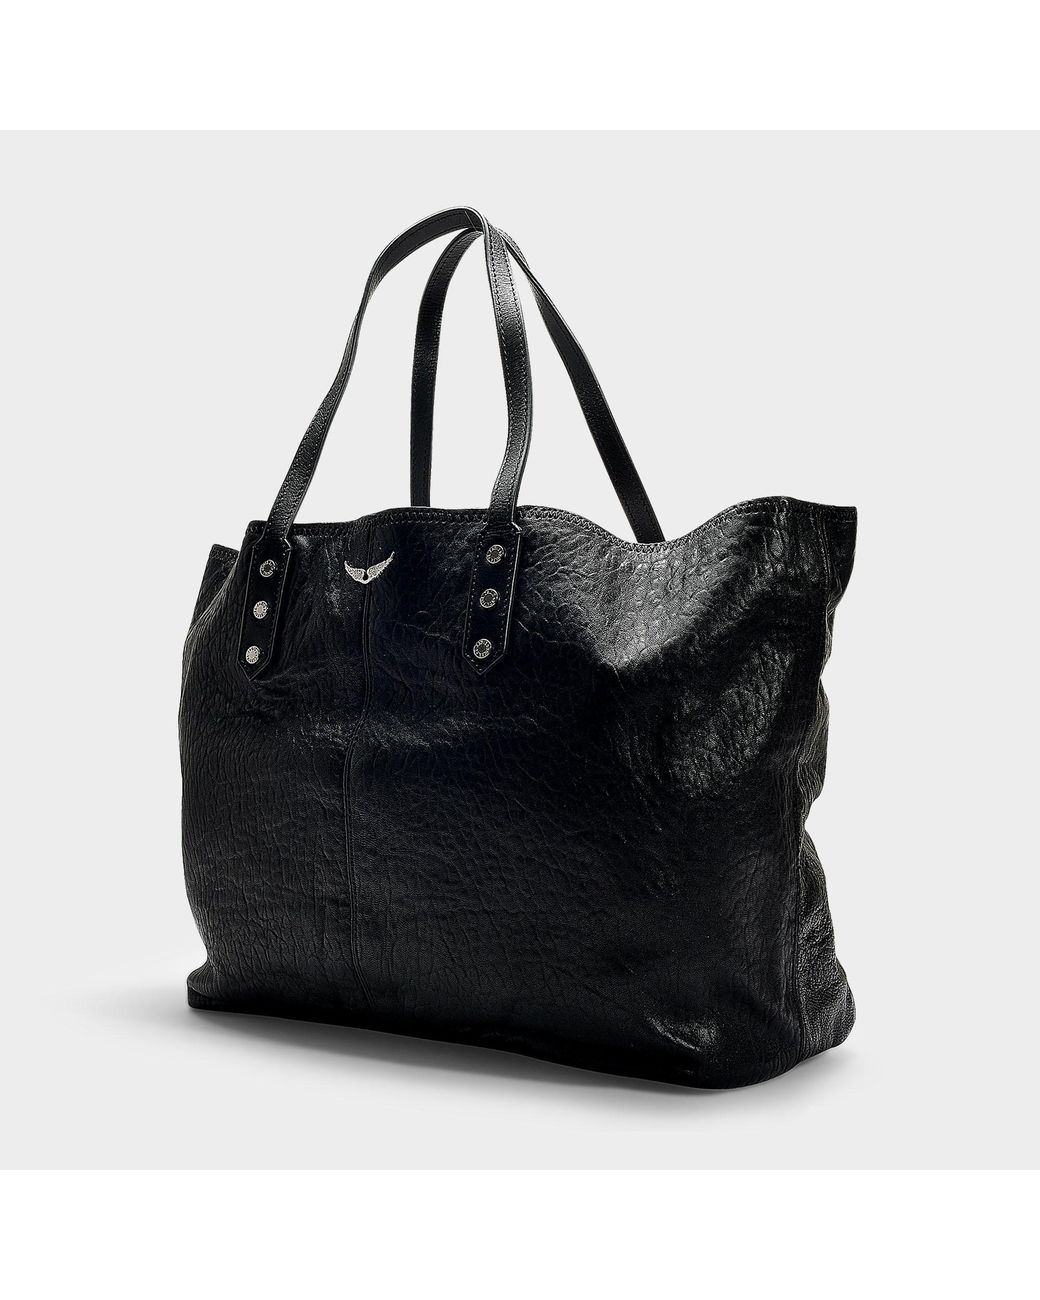 Zadig & Voltaire Mick Leather Tote in Black